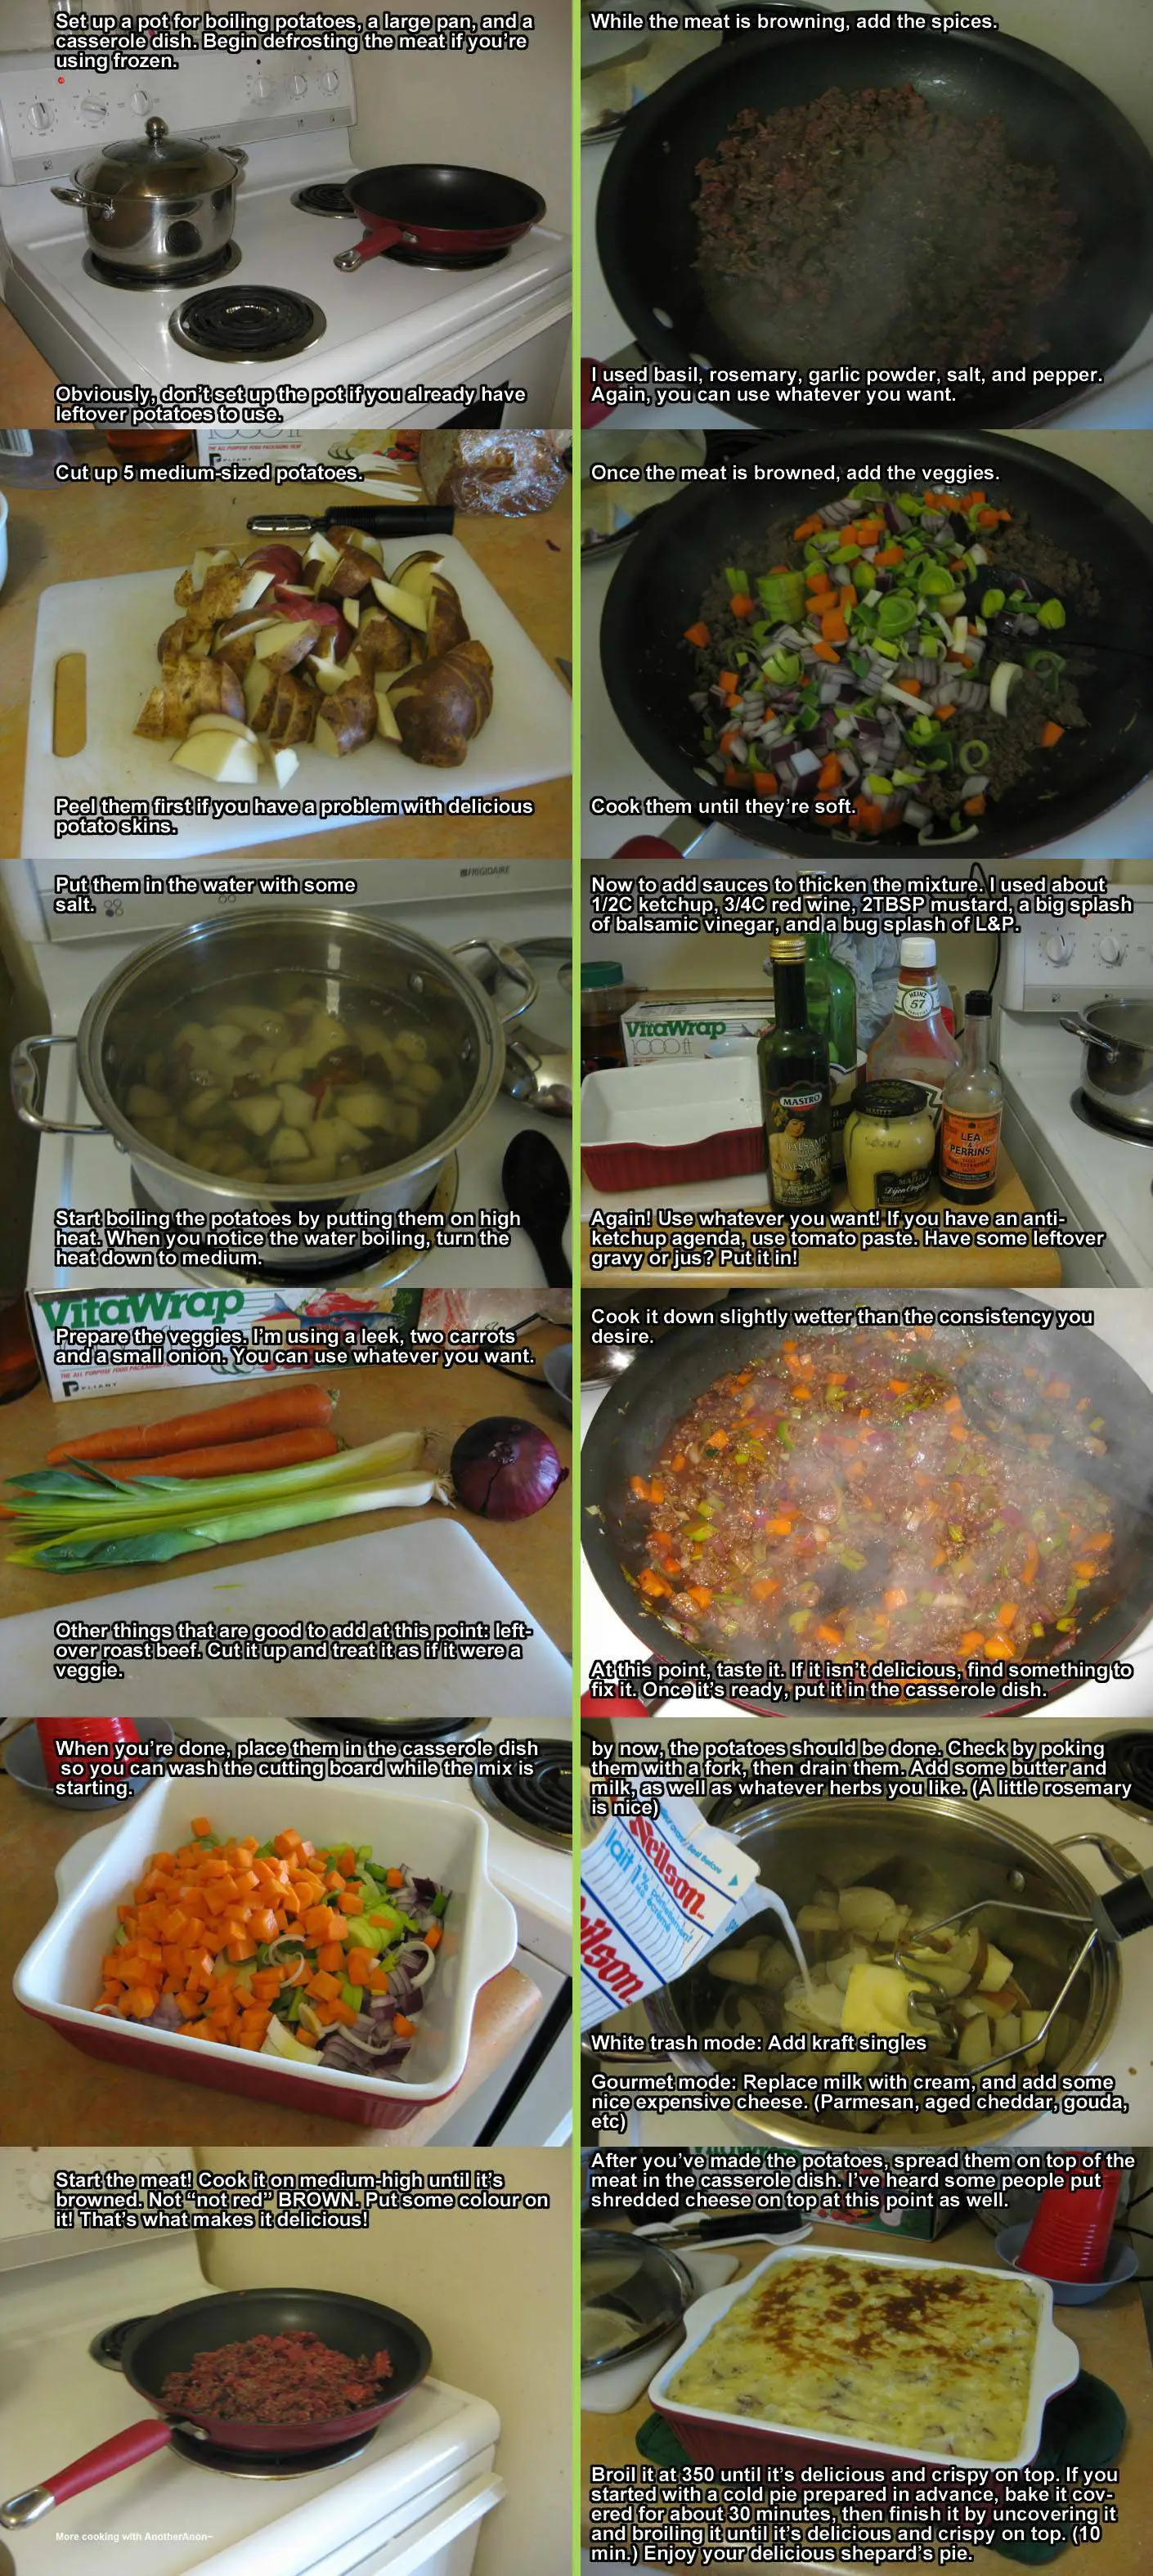 /fit/ recipe - /fit/ Meal